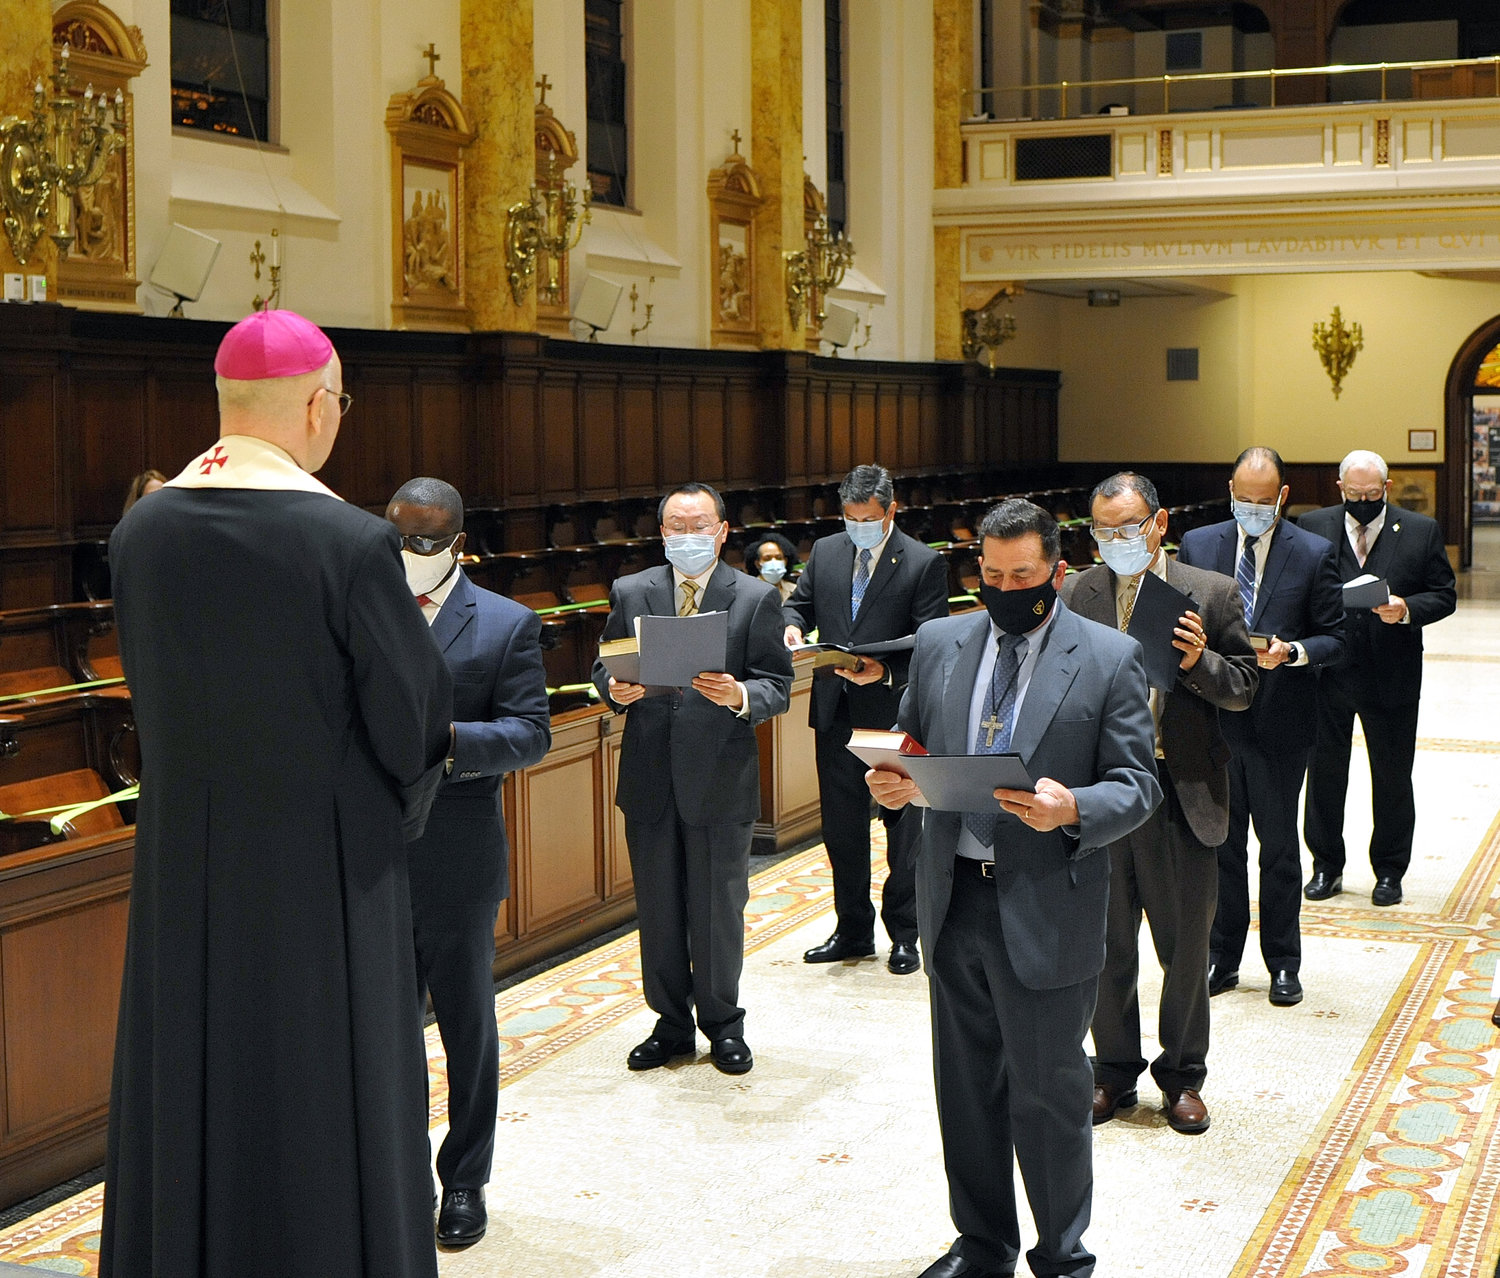 Auxiliary Bishop James Massa of Brooklyn, rector of St. Joseph’s Seminary in Dunwoodie, calls the deacon candidates to the Order of the Permanent Diaconate May 10.